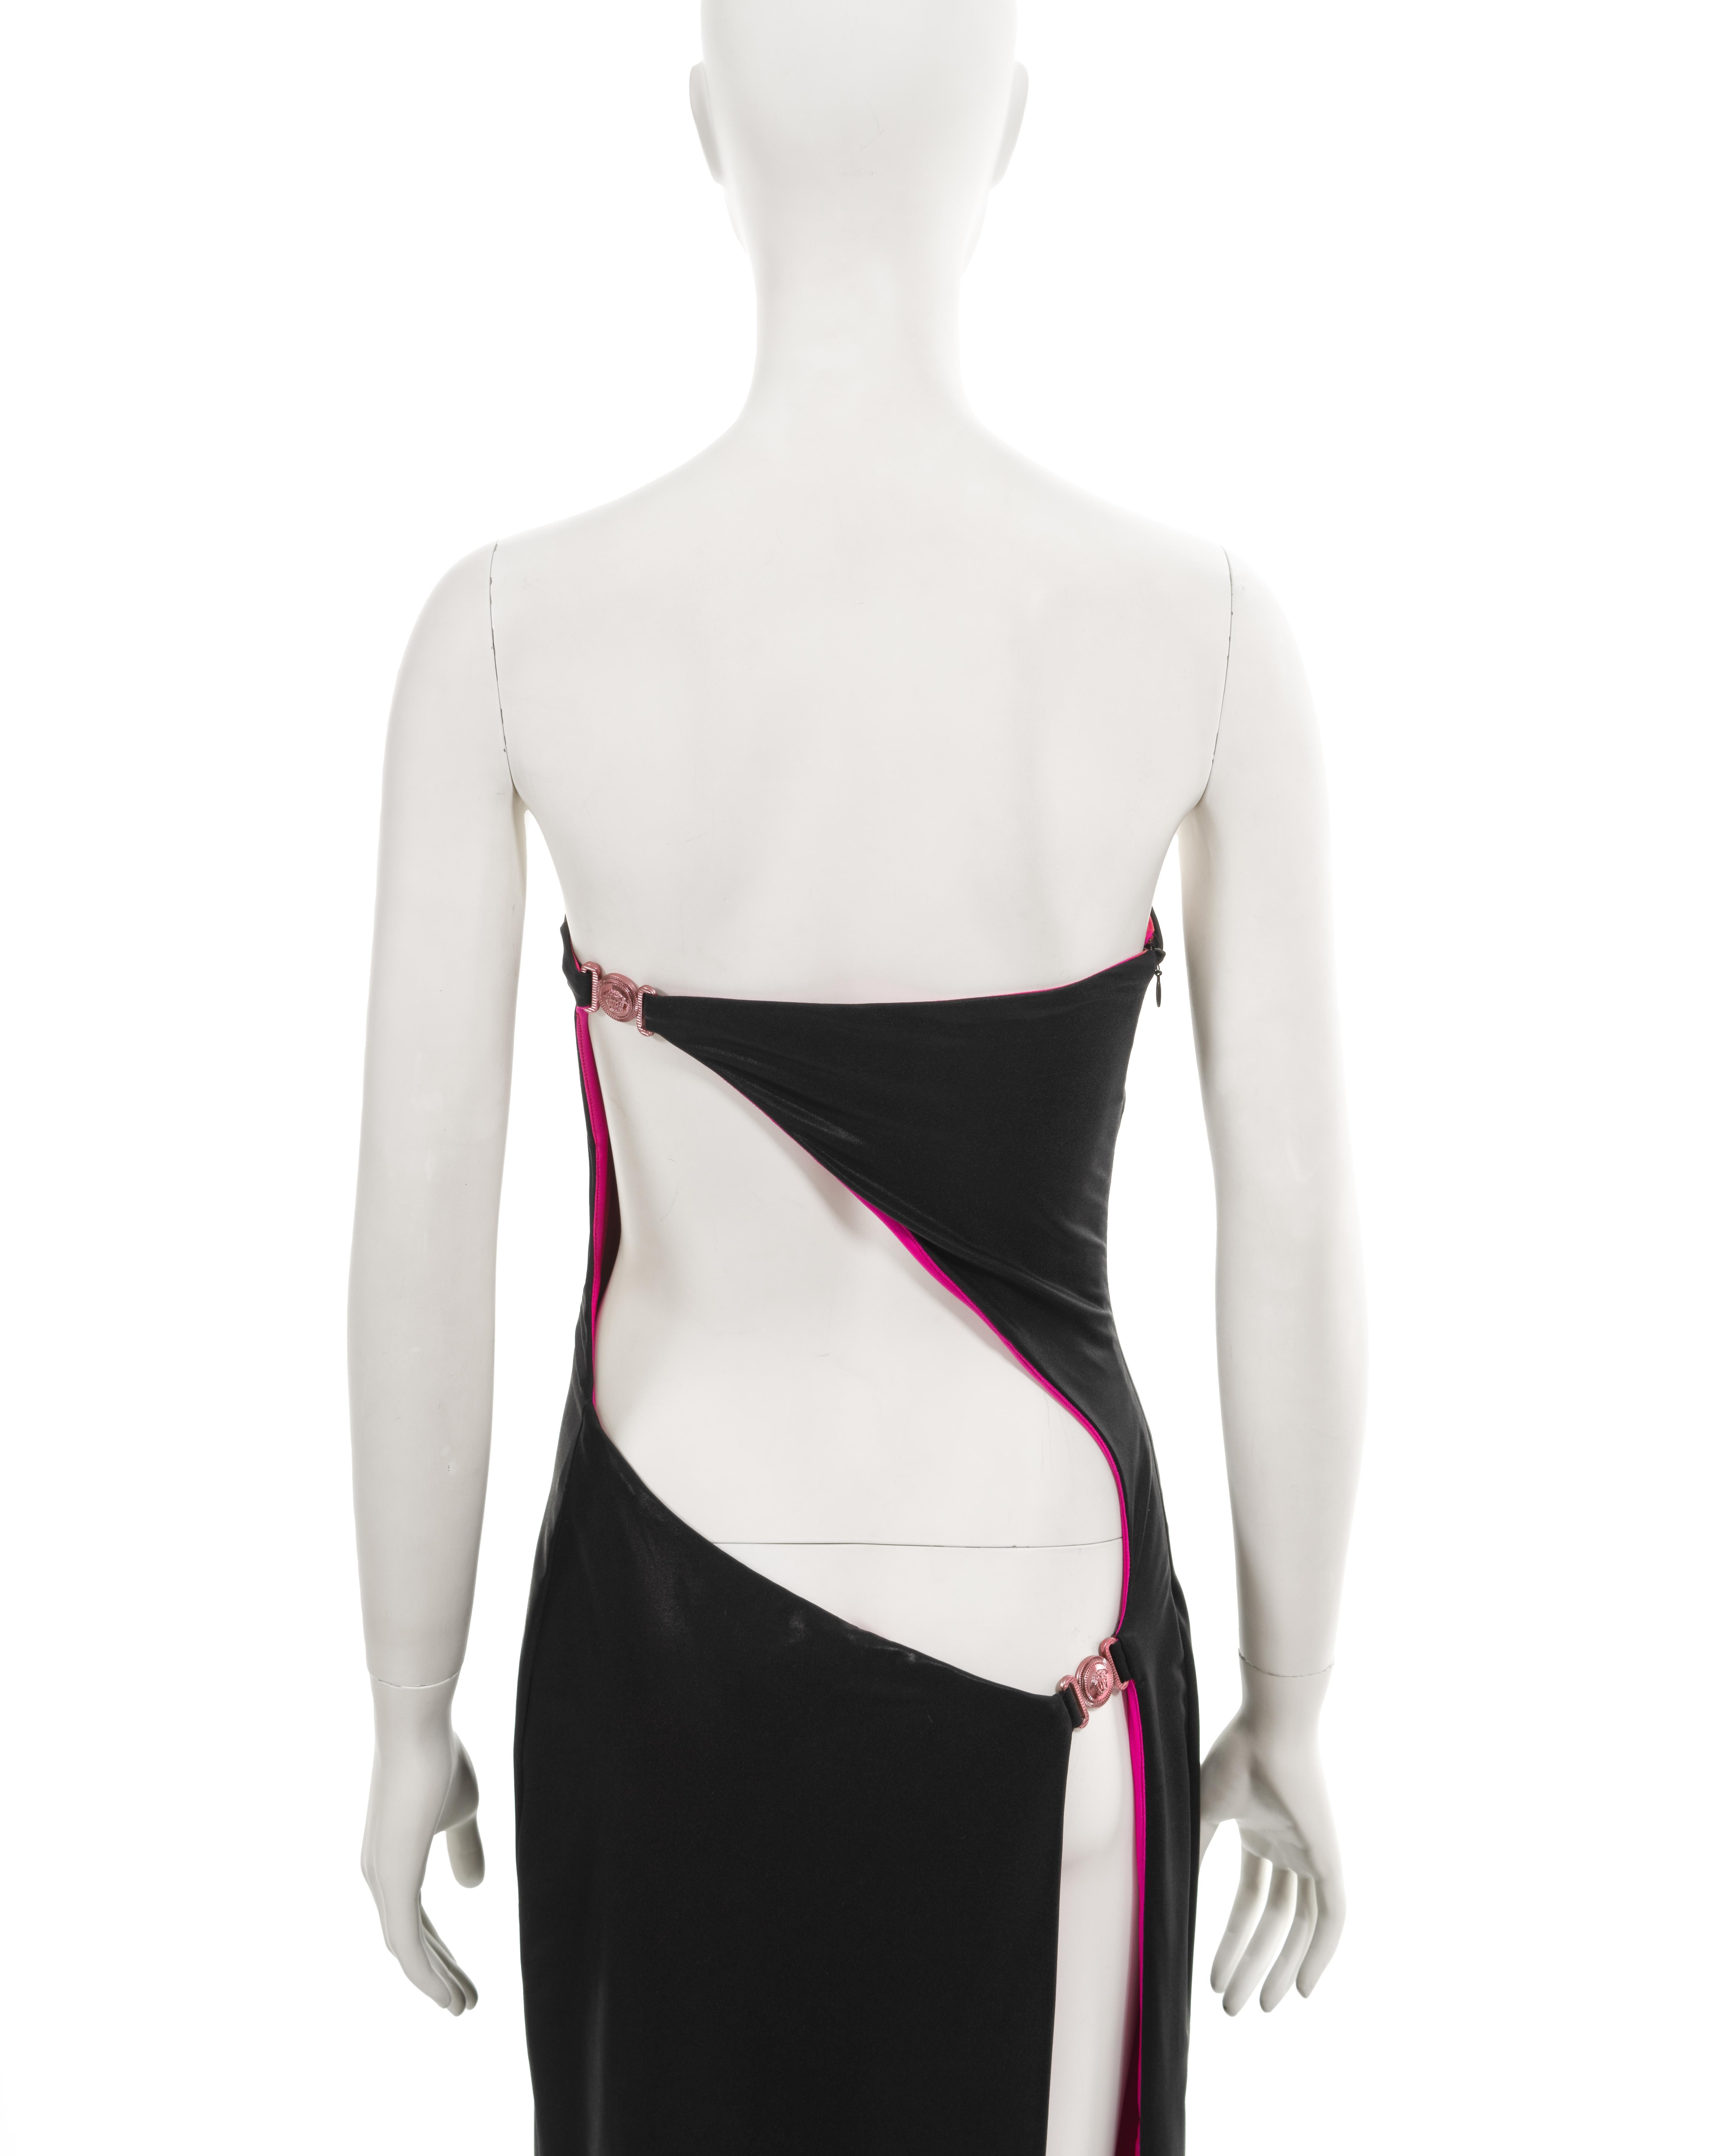 Women's Gianni Versace black wet-look strapless evening dress with cut outs, ss 1998 For Sale